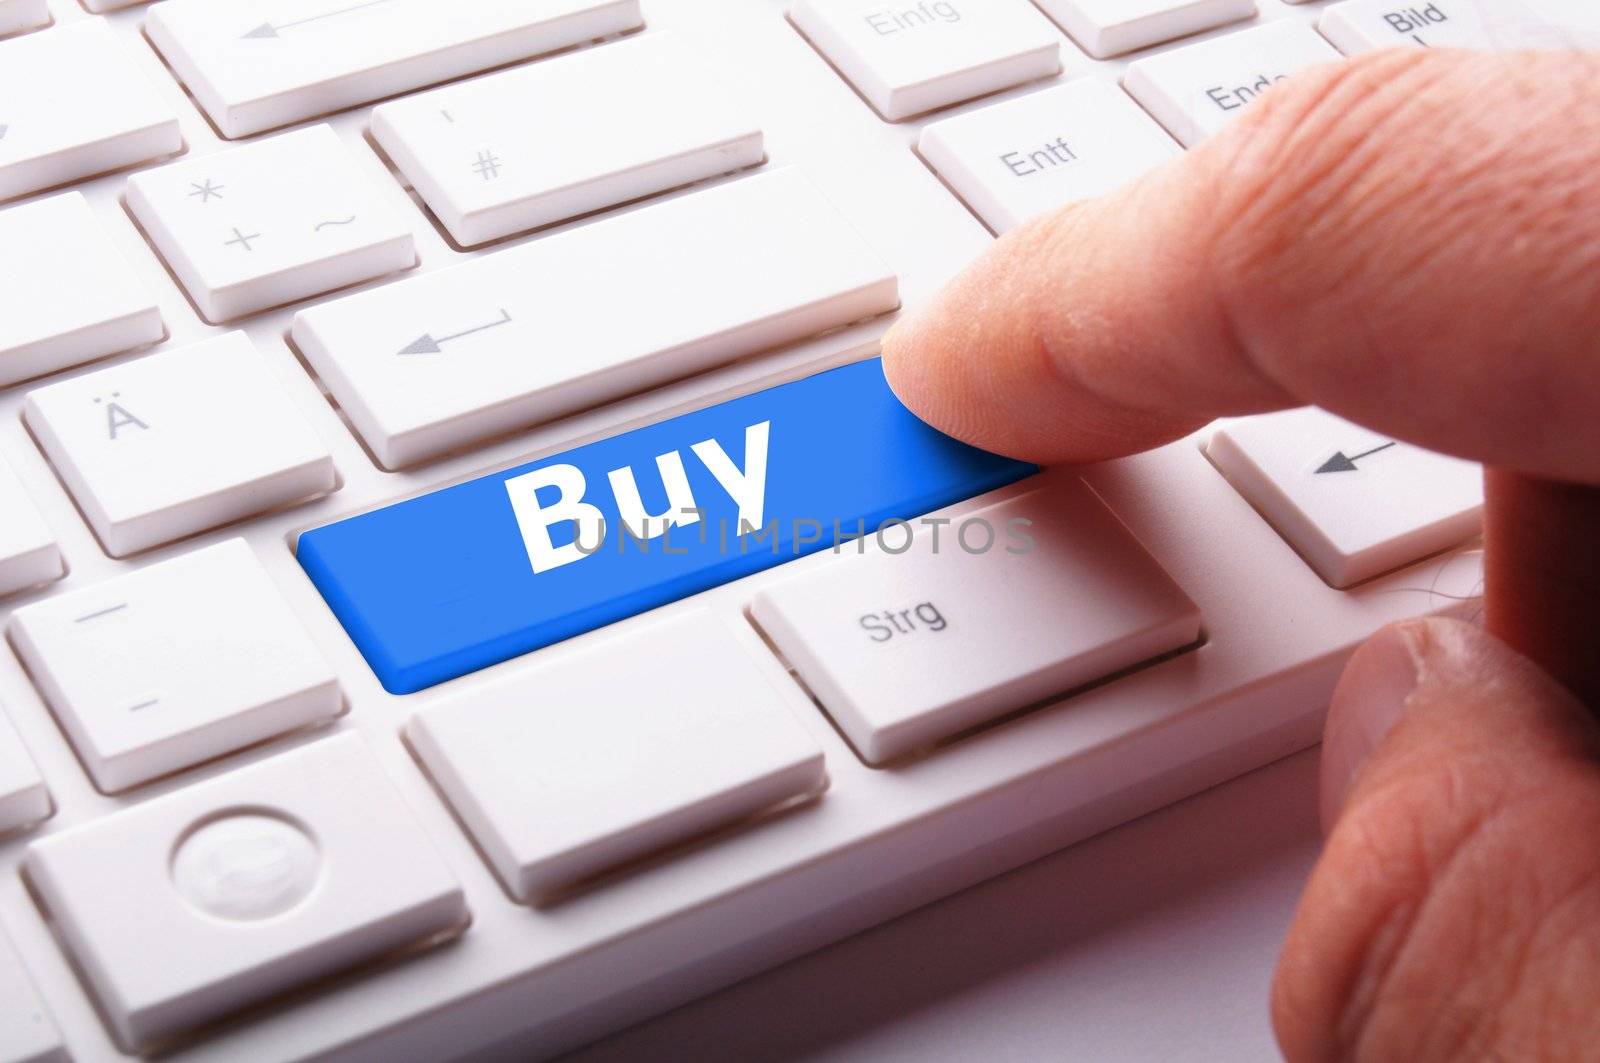 buy key on keyboard showing ecommerce or commerce concept